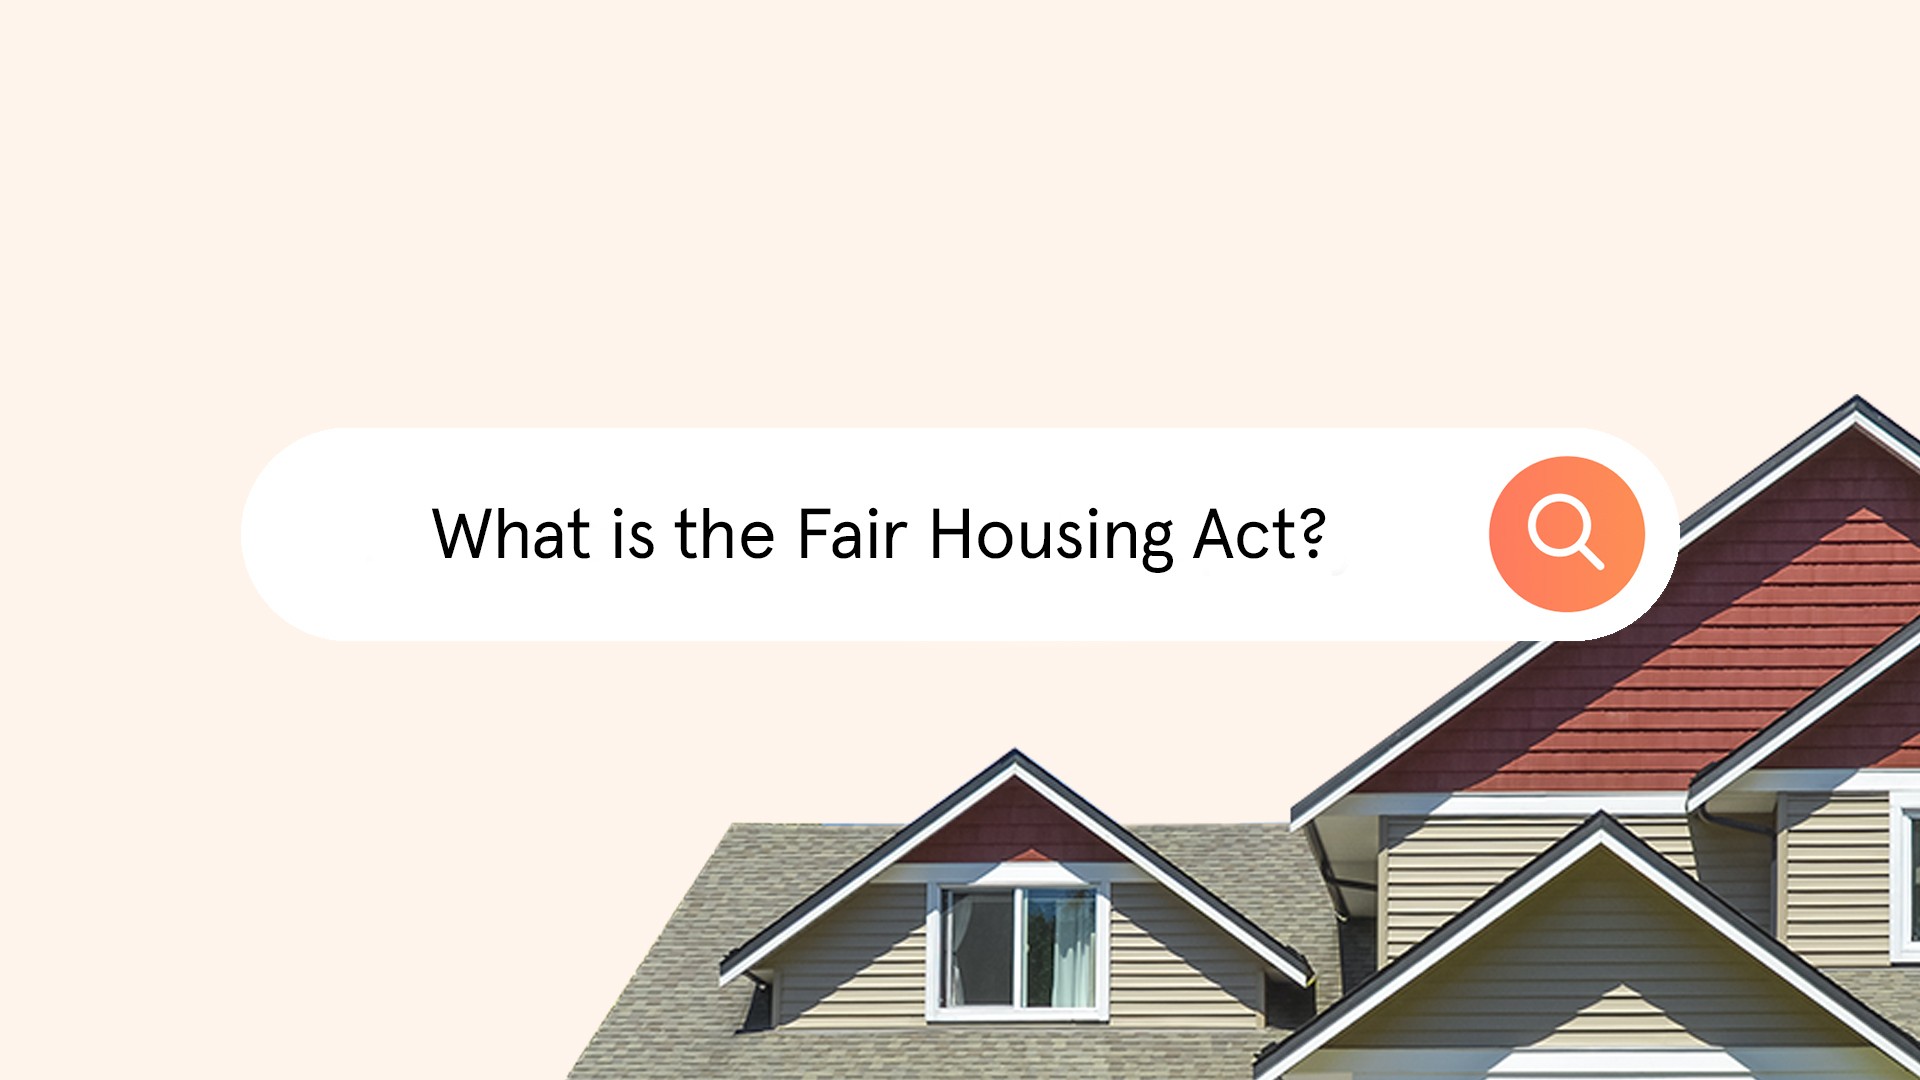 What is the Fair Housing Act?